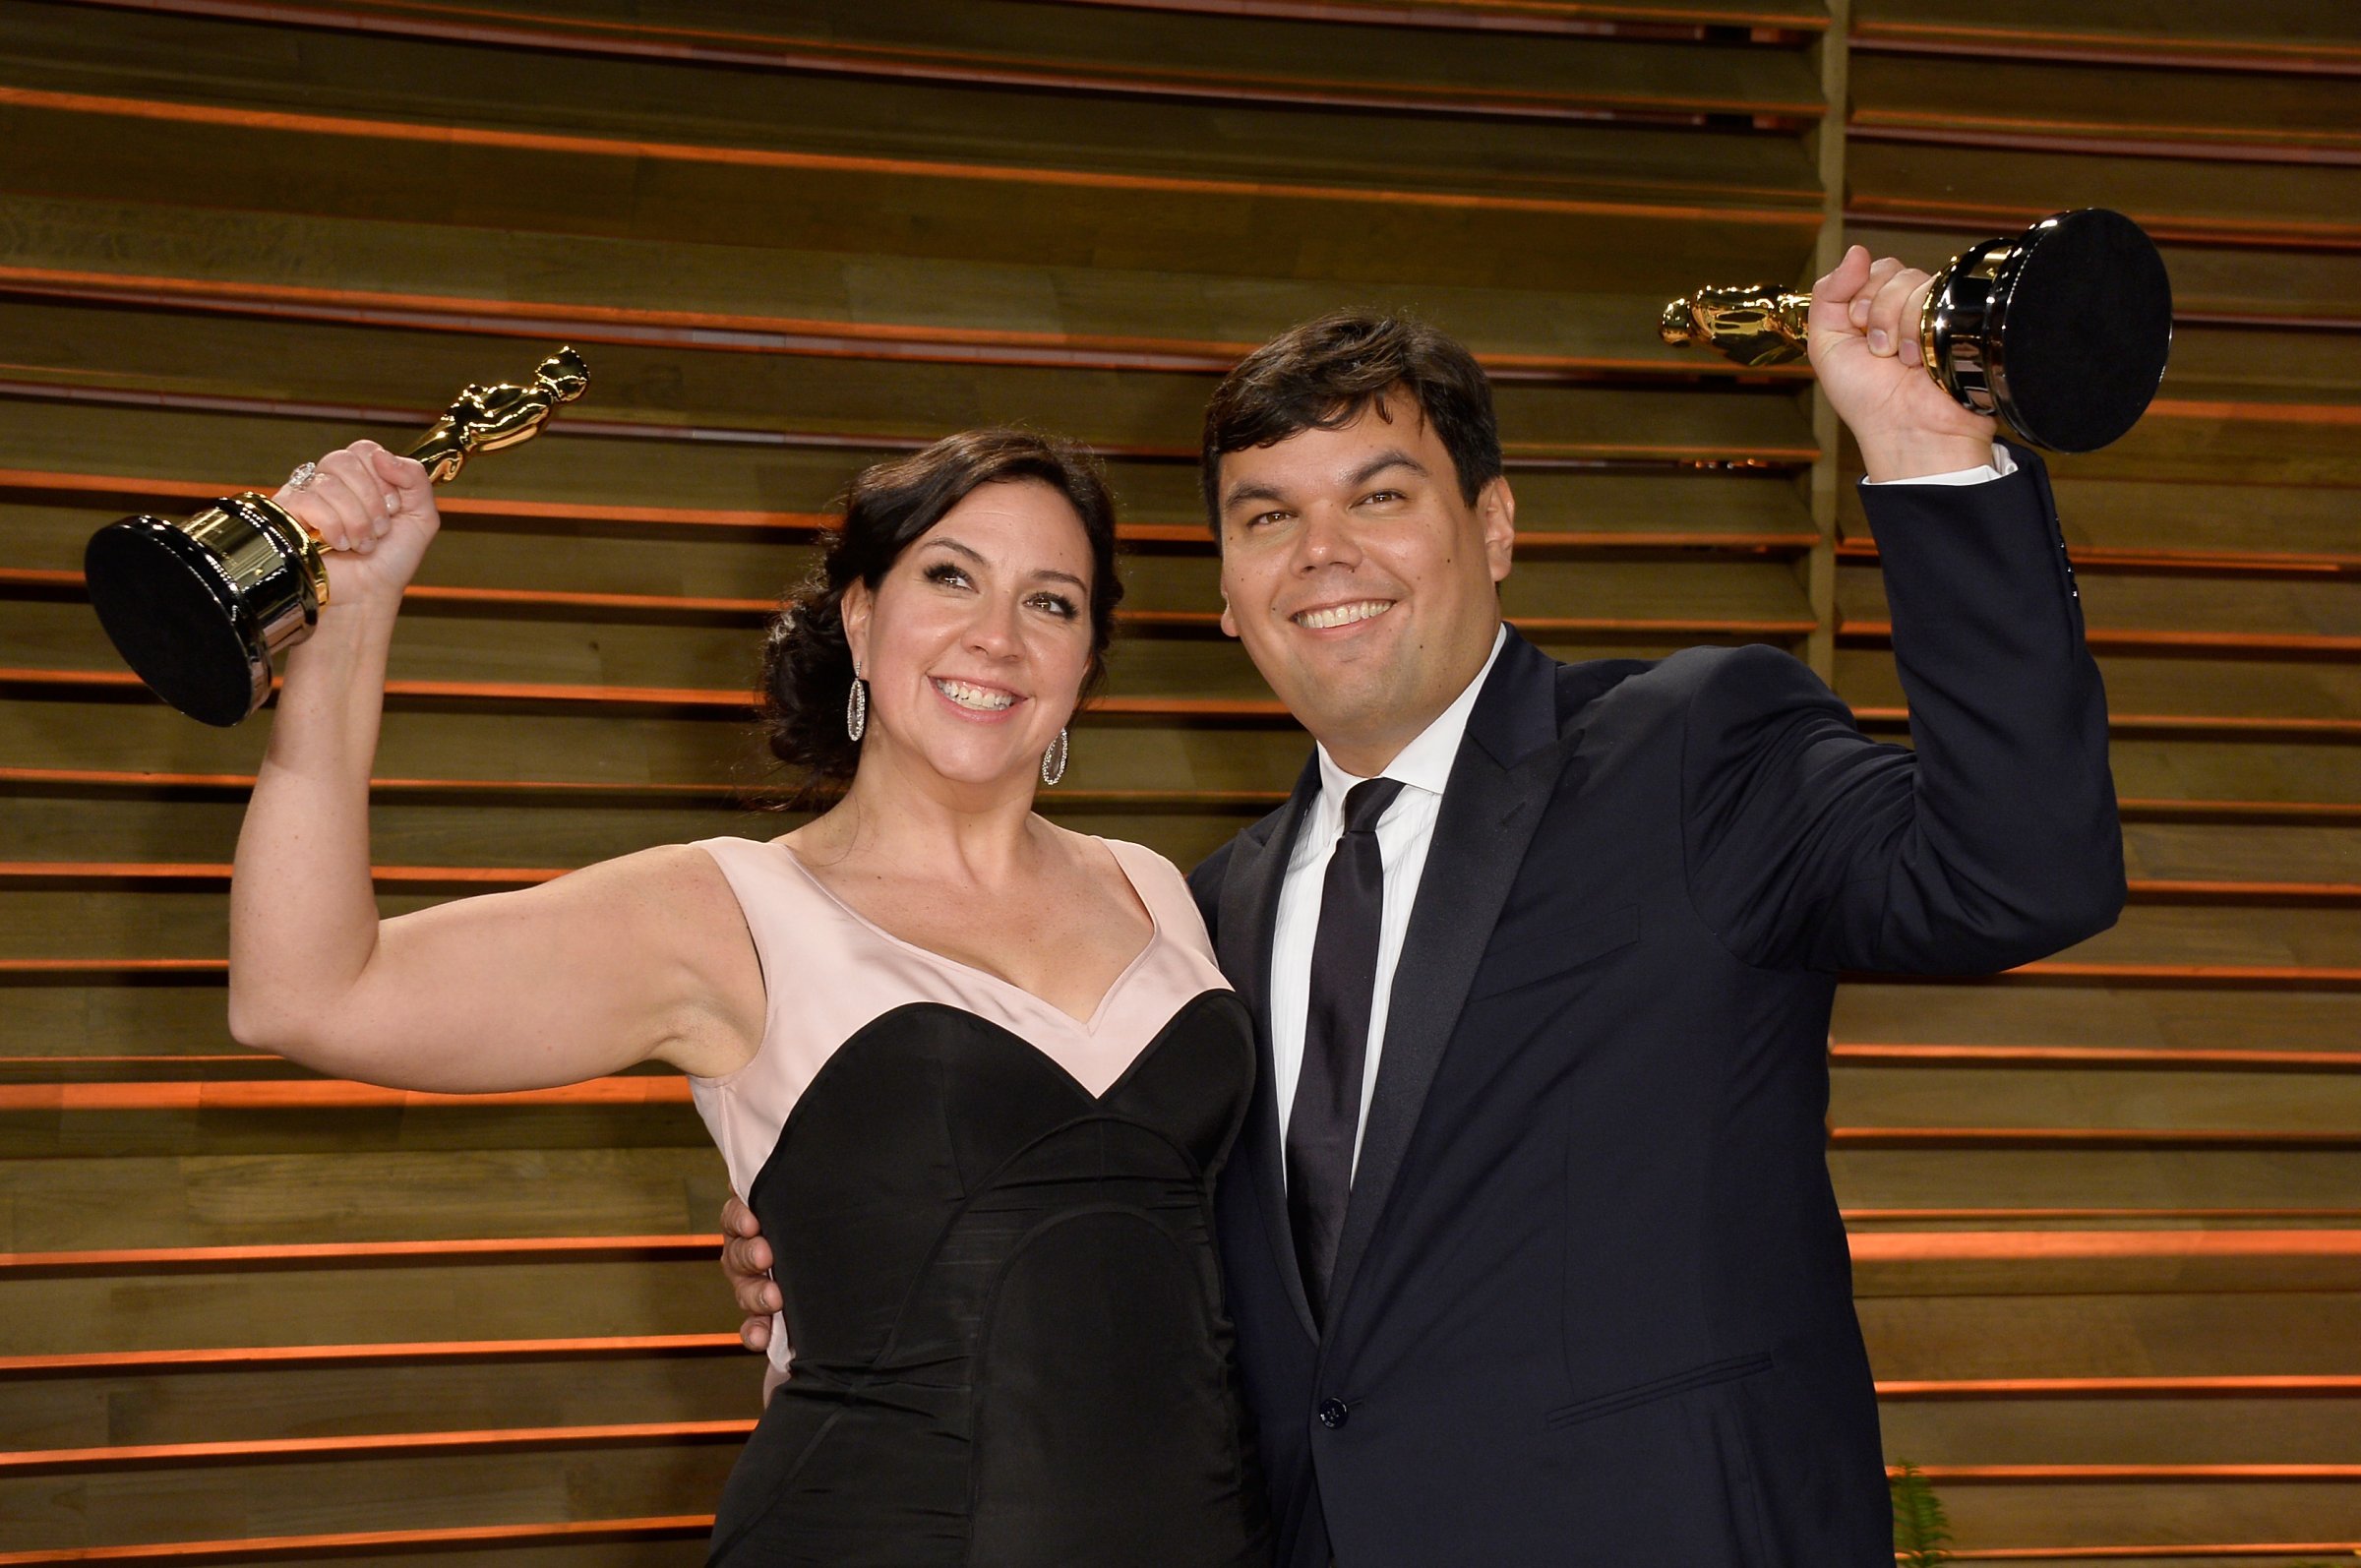 Songwriters Kristen Anderson-Lopez (L) and Robert Lopez at the 2014 Vanity Fair Oscar Party in West Hollywood, Calif. on March 2, 2014.